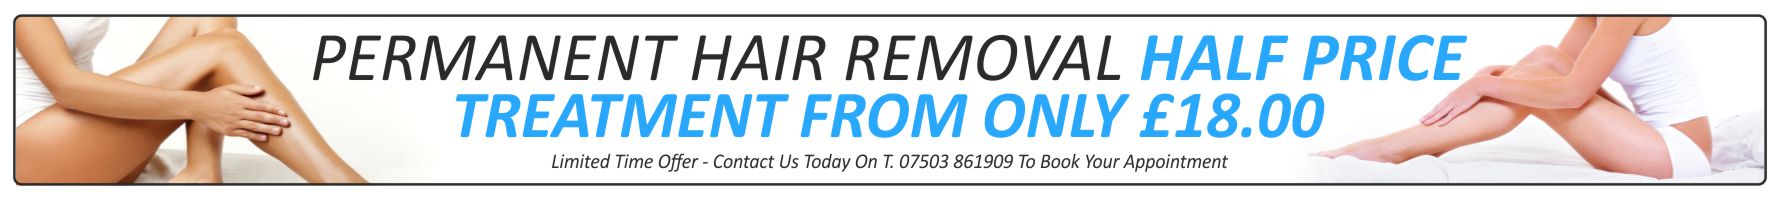 Laser Hair Removal Special Offer in Plymouth, South Devon